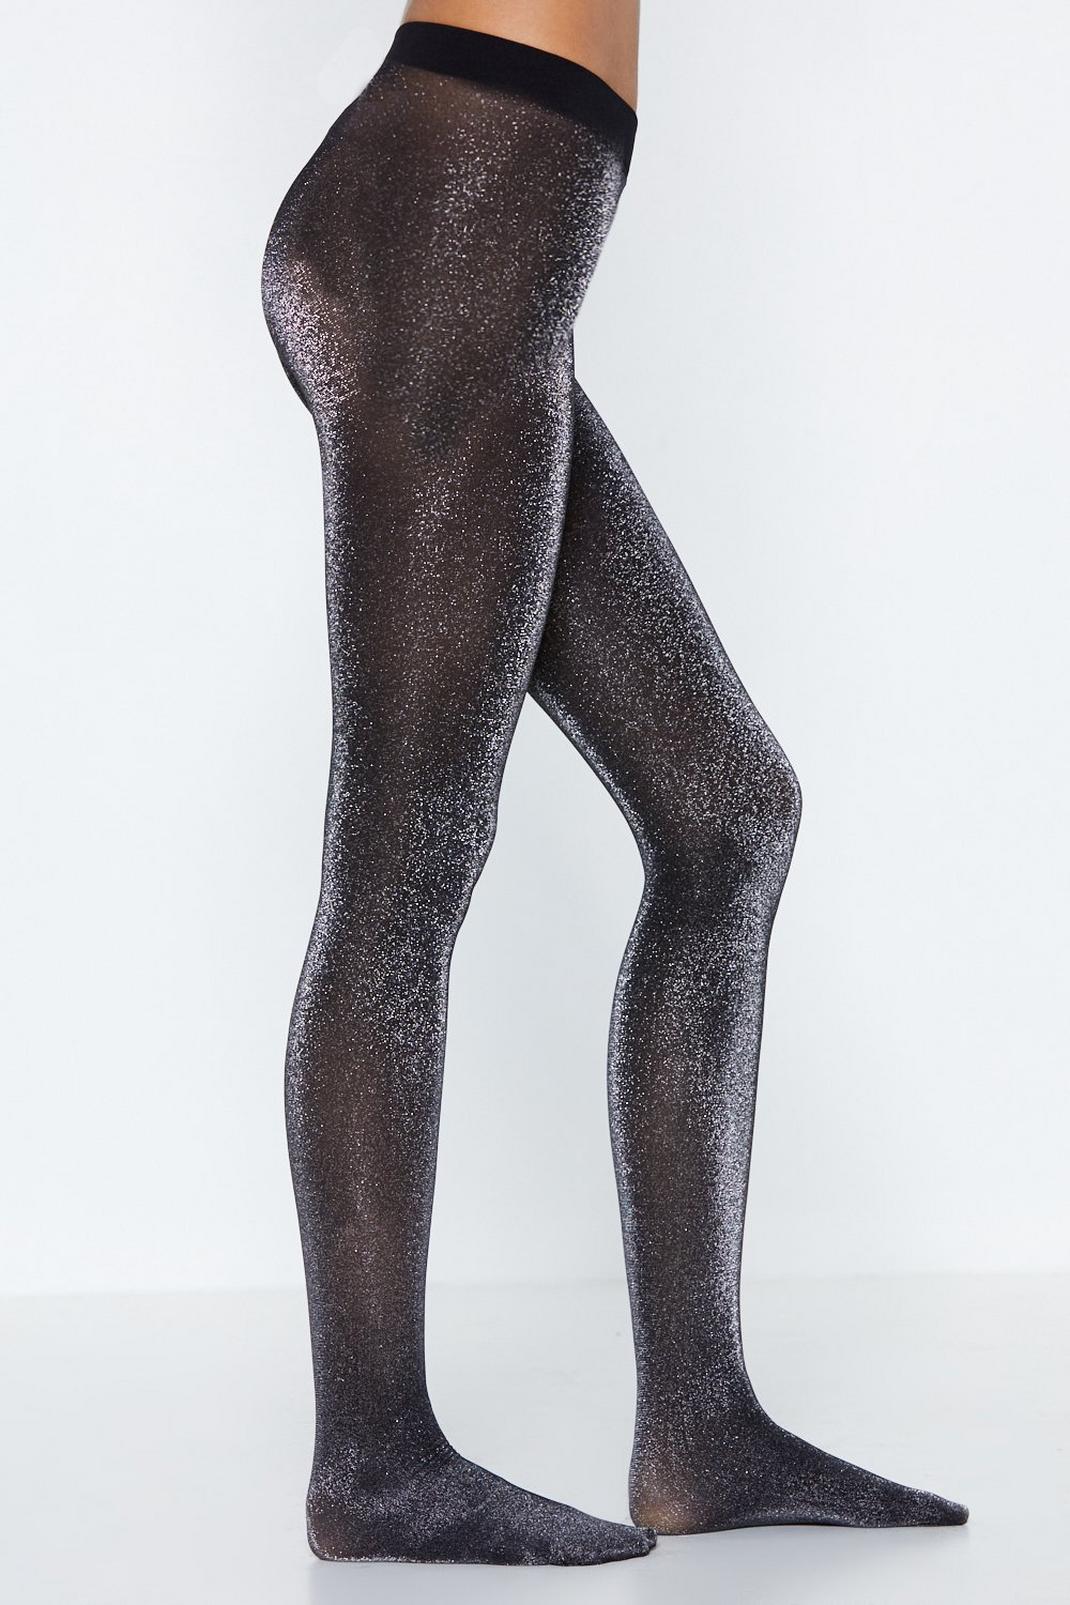 Withchic Silver Sequin Sparkle Leggings Shiny Bling Tights Glitter